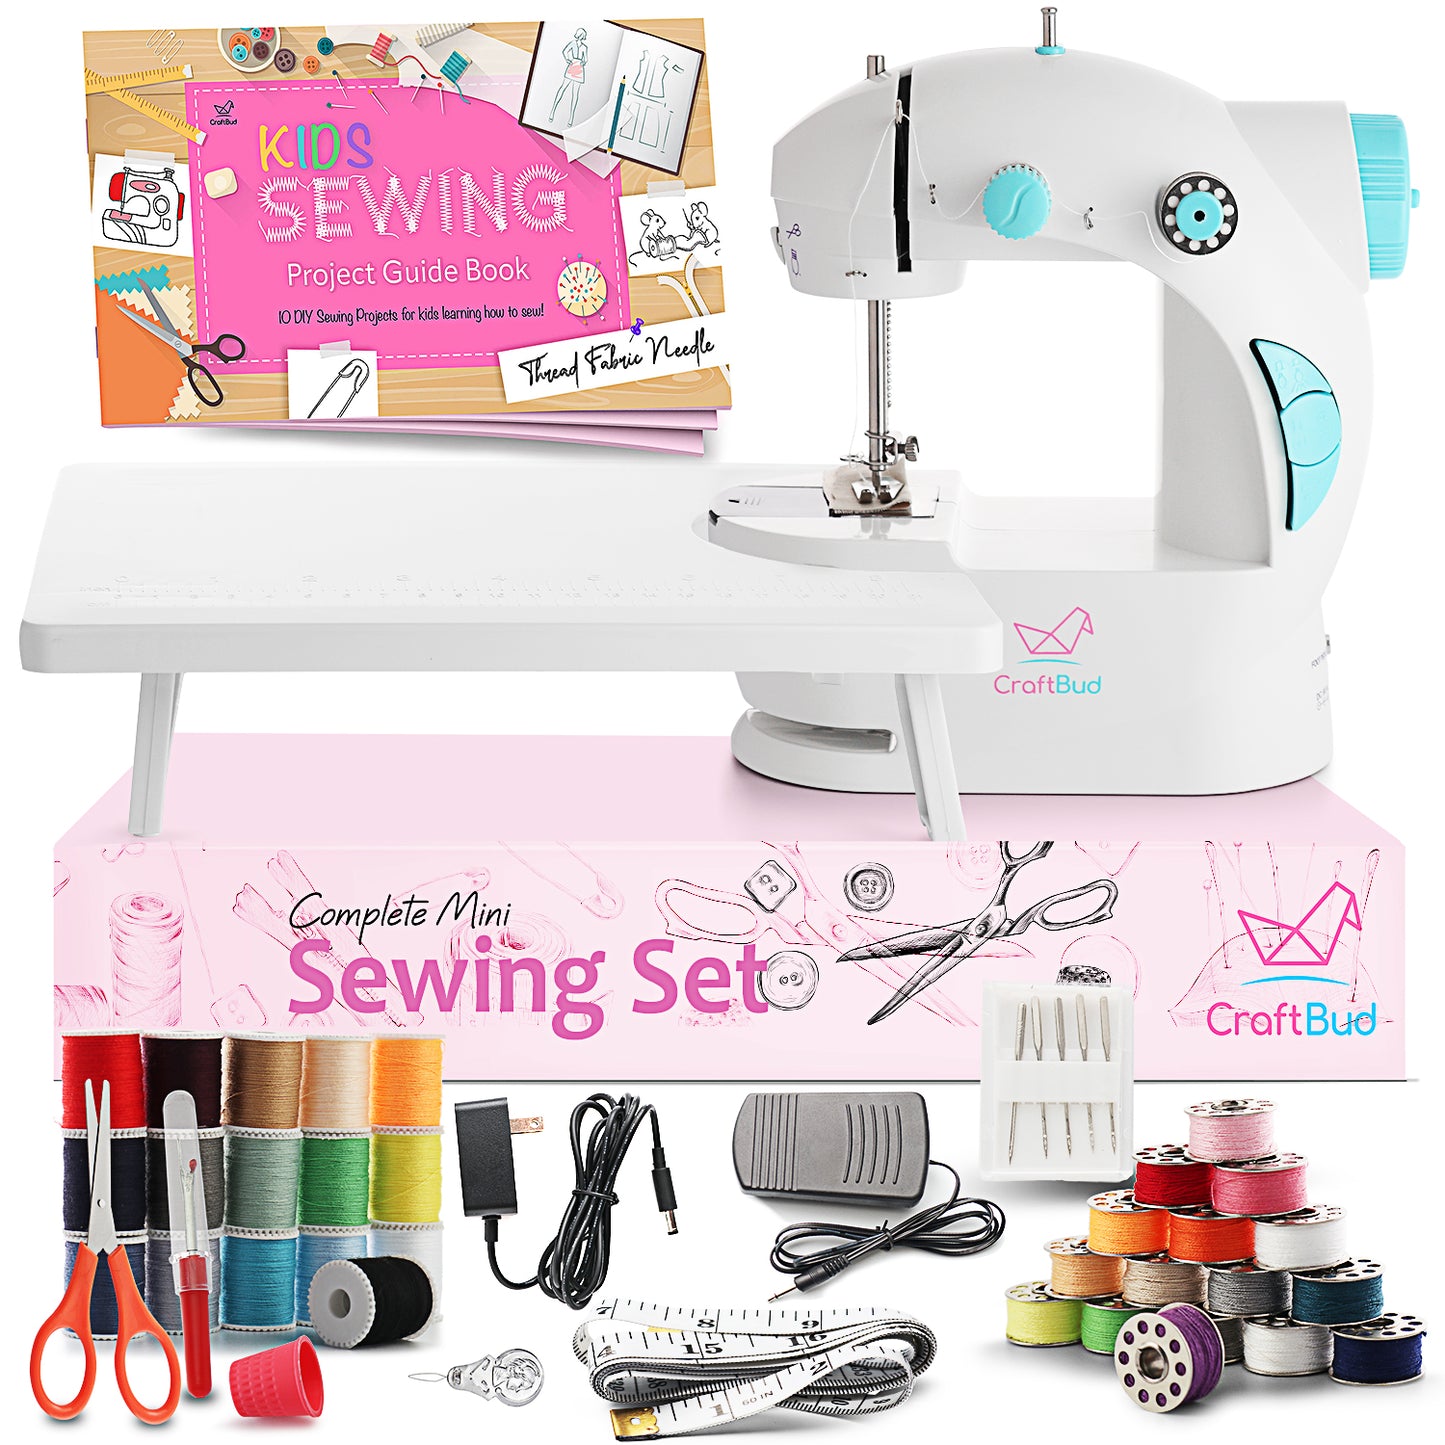 Portable Sewing Kit, Boxed Sewing Pattern Fabric Needles, Thread, Scissors  And Other Sewing Tools